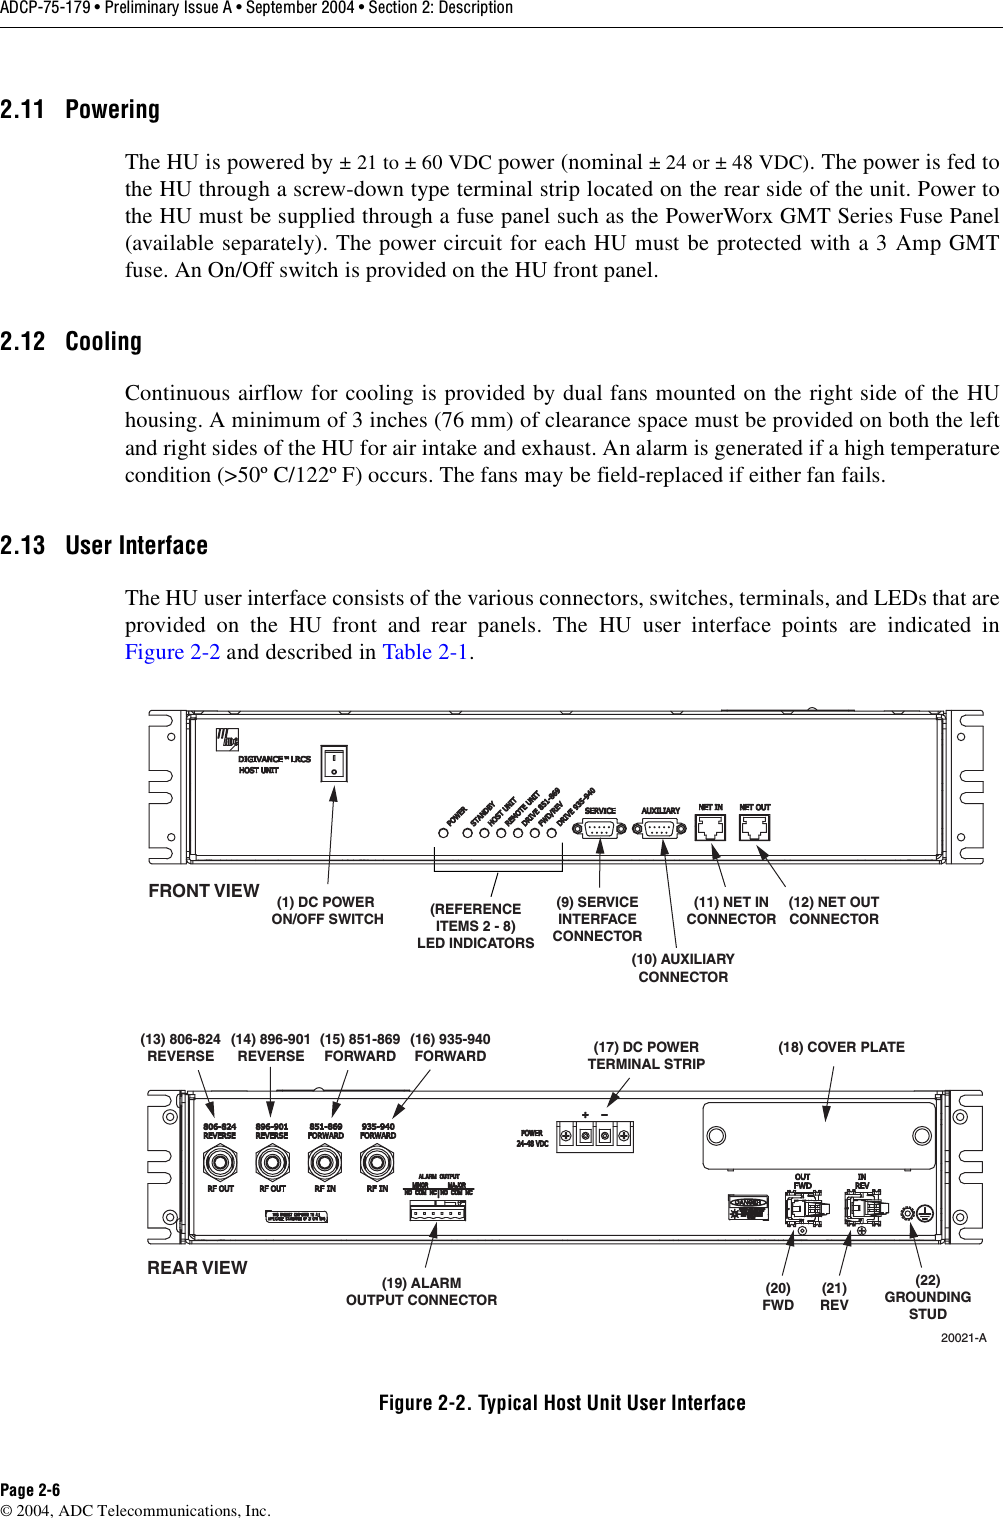 ADCP-75-179 • Preliminary Issue A • September 2004 • Section 2: DescriptionPage 2-6© 2004, ADC Telecommunications, Inc.2.11 PoweringThe HU is powered by ± 21 to ± 60 VDC power (nominal ± 24 or ± 48 VDC). The power is fed tothe HU through a screw-down type terminal strip located on the rear side of the unit. Power tothe HU must be supplied through a fuse panel such as the PowerWorx GMT Series Fuse Panel(available separately). The power circuit for each HU must be protected with a 3 Amp GMTfuse. An On/Off switch is provided on the HU front panel. 2.12 CoolingContinuous airflow for cooling is provided by dual fans mounted on the right side of the HUhousing. A minimum of 3 inches (76 mm) of clearance space must be provided on both the leftand right sides of the HU for air intake and exhaust. An alarm is generated if a high temperaturecondition (&gt;50º C/122º F) occurs. The fans may be field-replaced if either fan fails. 2.13 User InterfaceThe HU user interface consists of the various connectors, switches, terminals, and LEDs that areprovided on the HU front and rear panels. The HU user interface points are indicated inFigure 2-2 and described in Table 2-1. Figure 2-2. Typical Host Unit User Interface(1) DC POWER ON/OFF SWITCH(21)REV(20)FWD(REFERENCEITEMS 2 - 8)LED INDICATORS(9) SERVICEINTERFACECONNECTOR(11) NET INCONNECTOR(10) AUXILIARYCONNECTOR(12) NET OUTCONNECTOR(19) ALARMOUTPUT CONNECTOR(13) 806-824REVERSE(15) 851-869FORWARD(16) 935-940FORWARD(14) 896-901REVERSE20021-A(17) DC POWERTERMINAL STRIPREAR VIEWFRONT VIEW(18) COVER PLATE(22)GROUNDINGSTUD